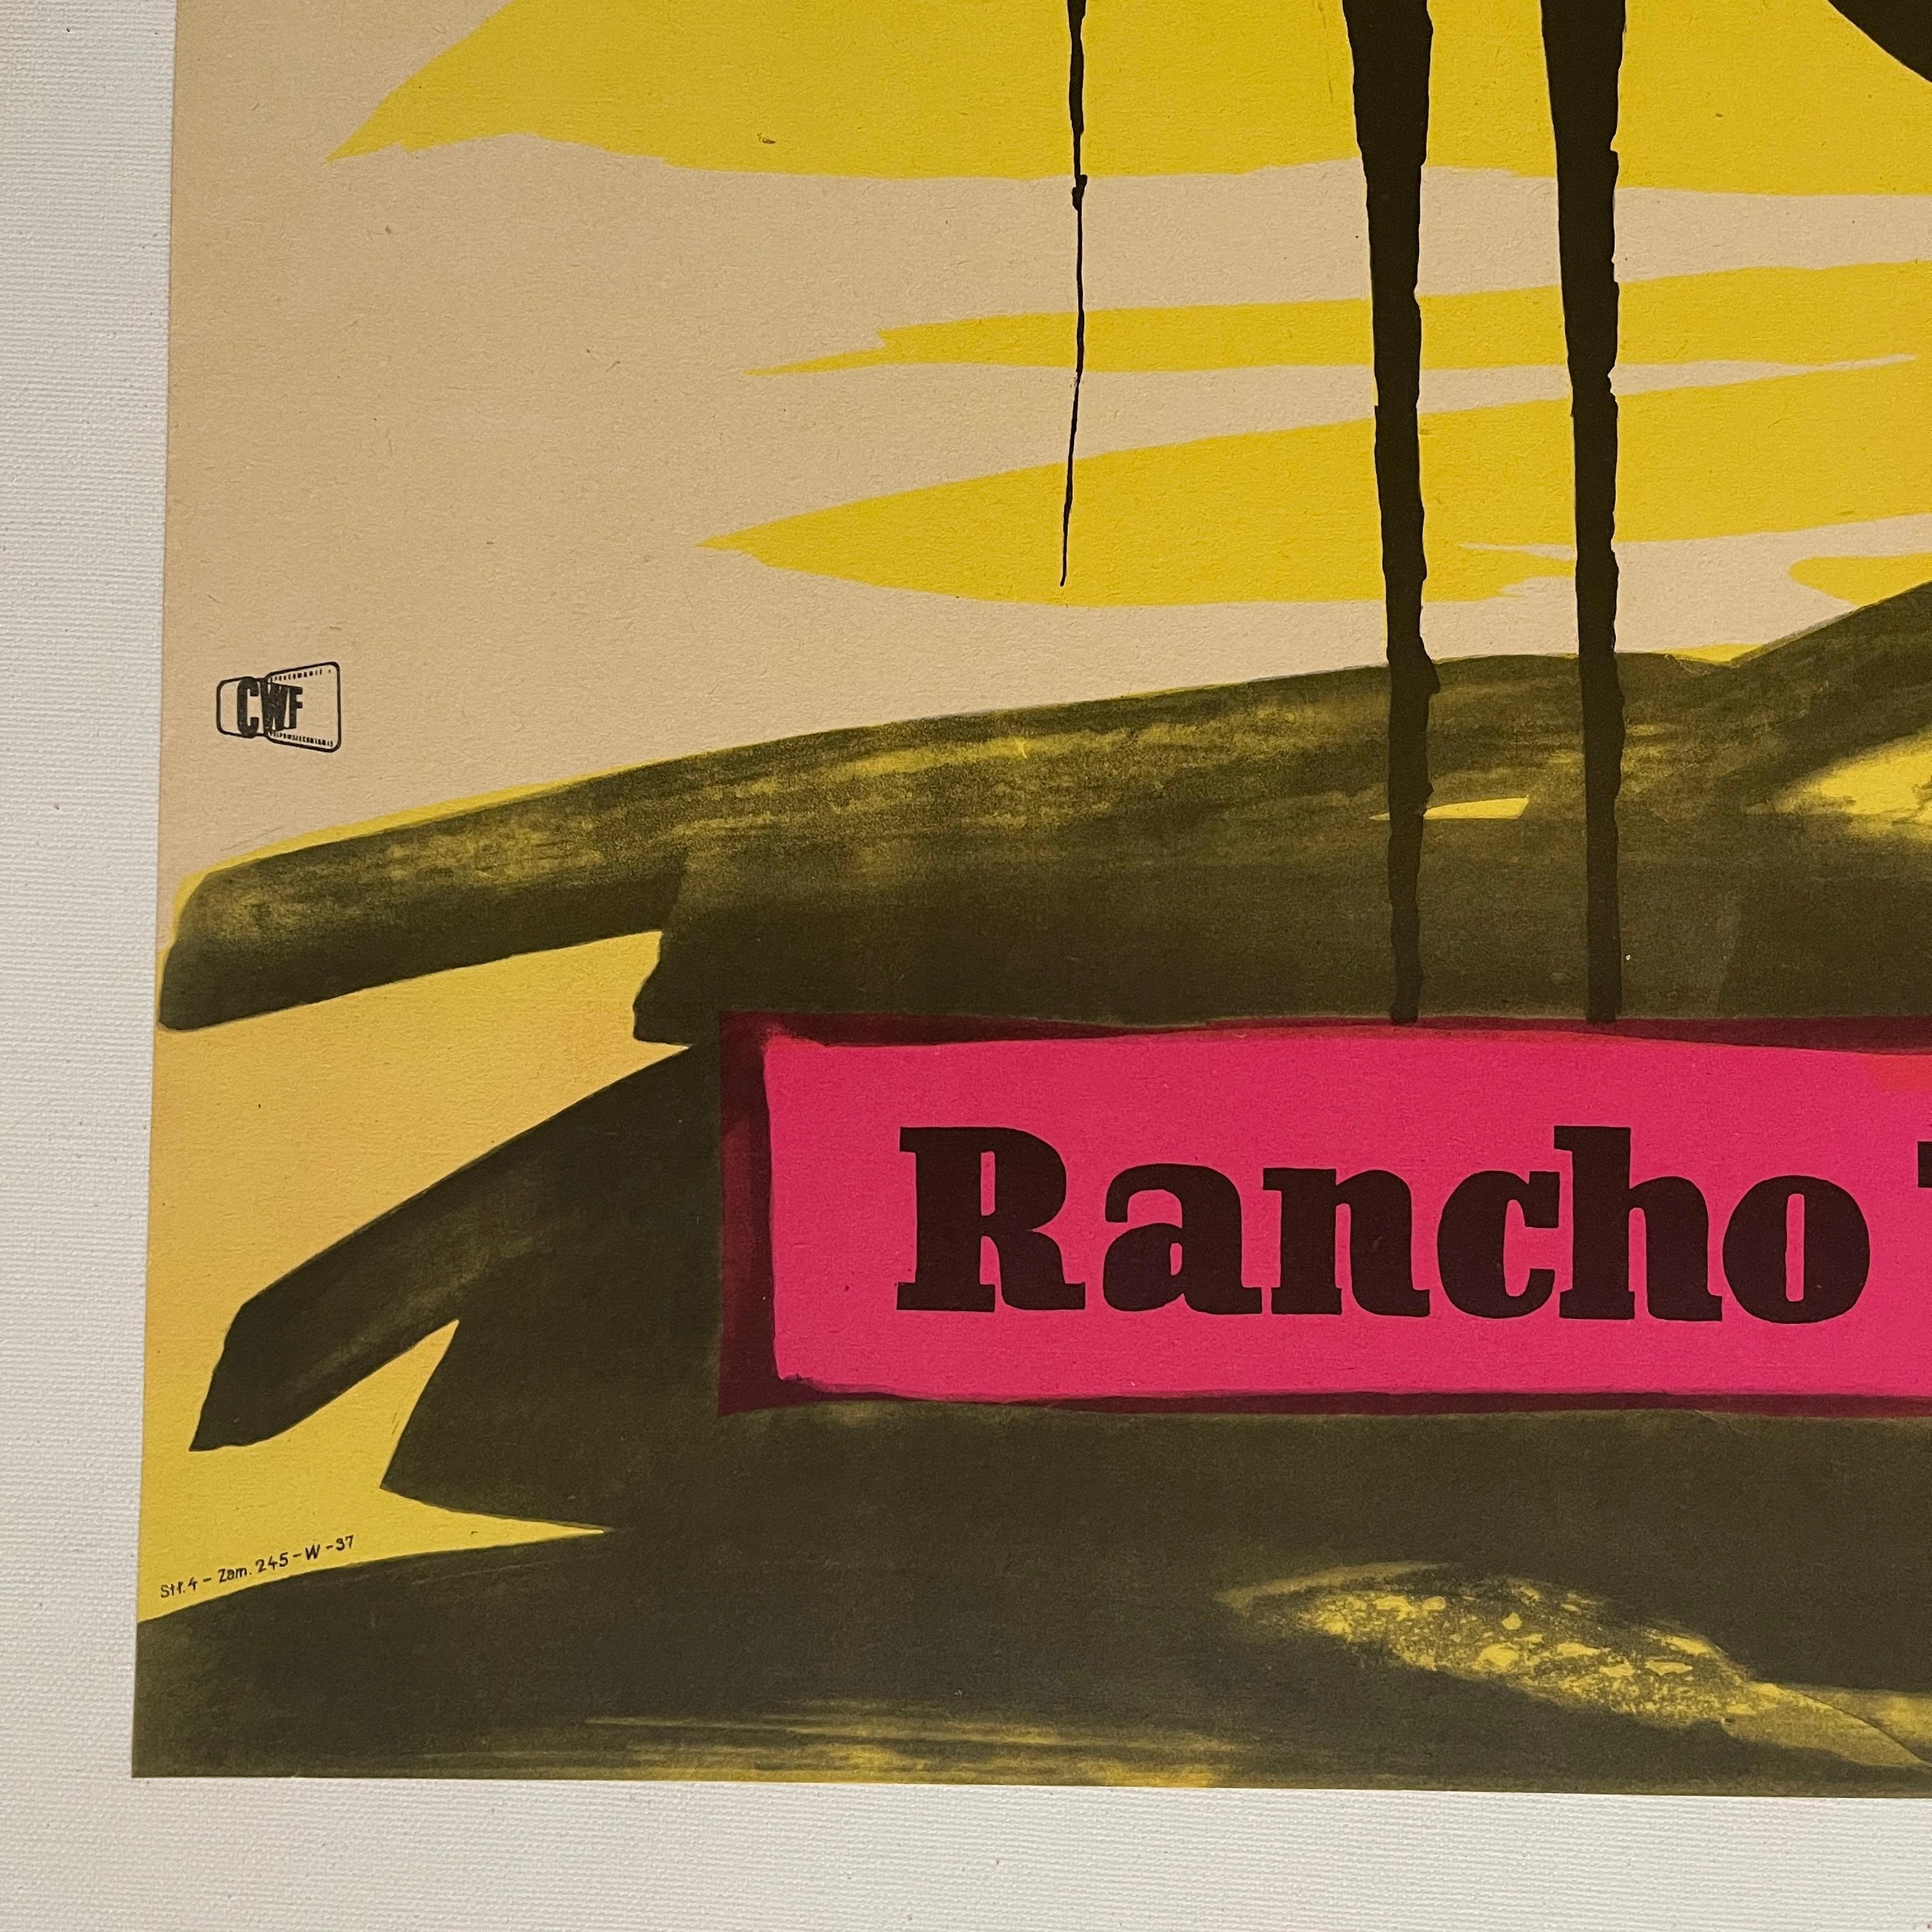 Ranch Texas, Vintage Polish Movie Poster by Jerzy Flisak, 1959 In Excellent Condition For Sale In London, GB